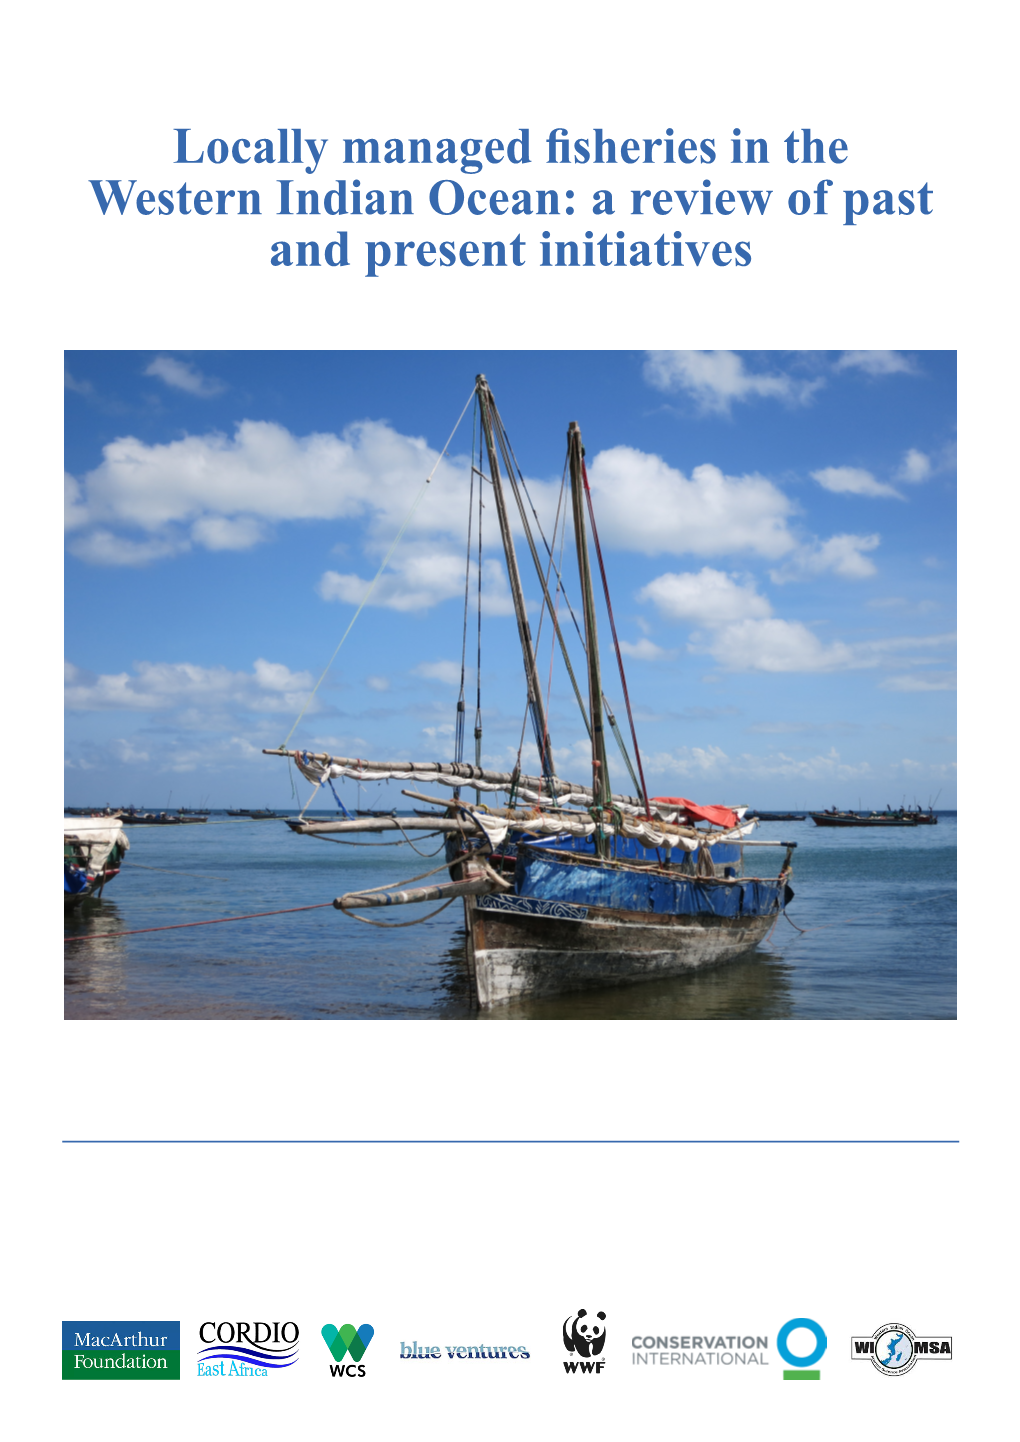 Locally Managed Fisheries in the Western Indian Ocean: a Review of Past and Present Initiatives